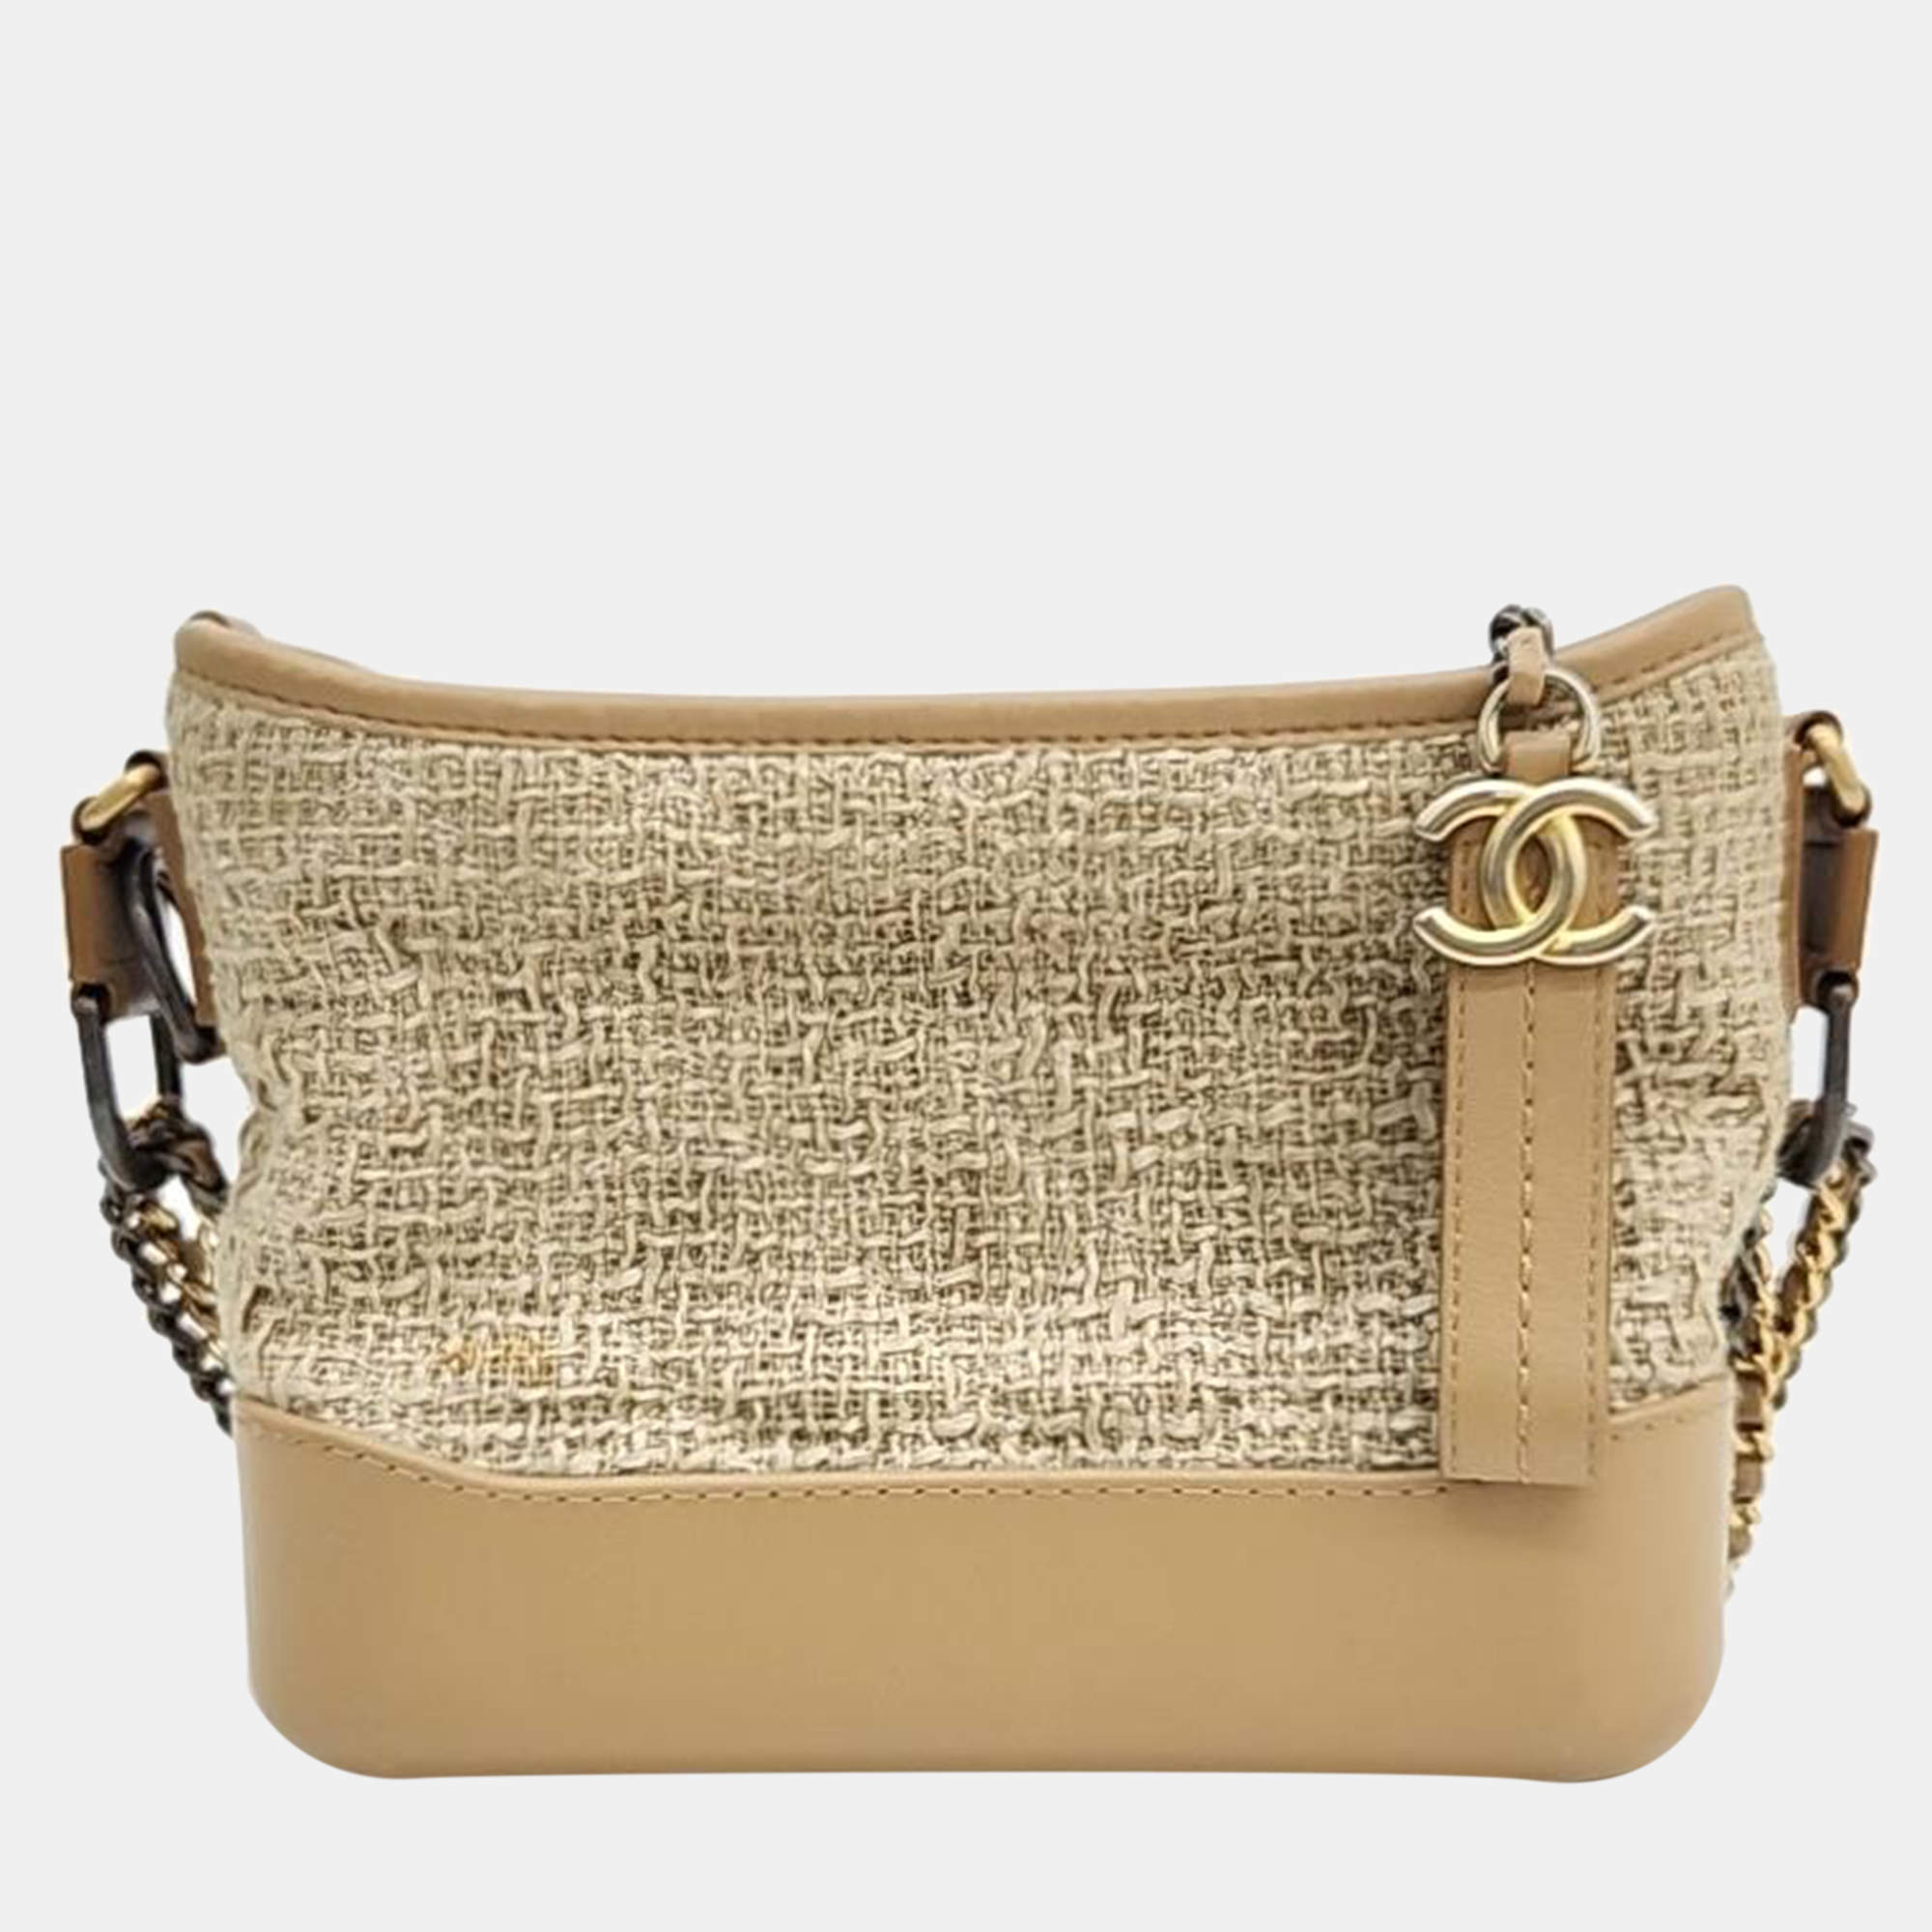 Chanel Beige Tweed and Leather Small Gabrielle Hobo Bag